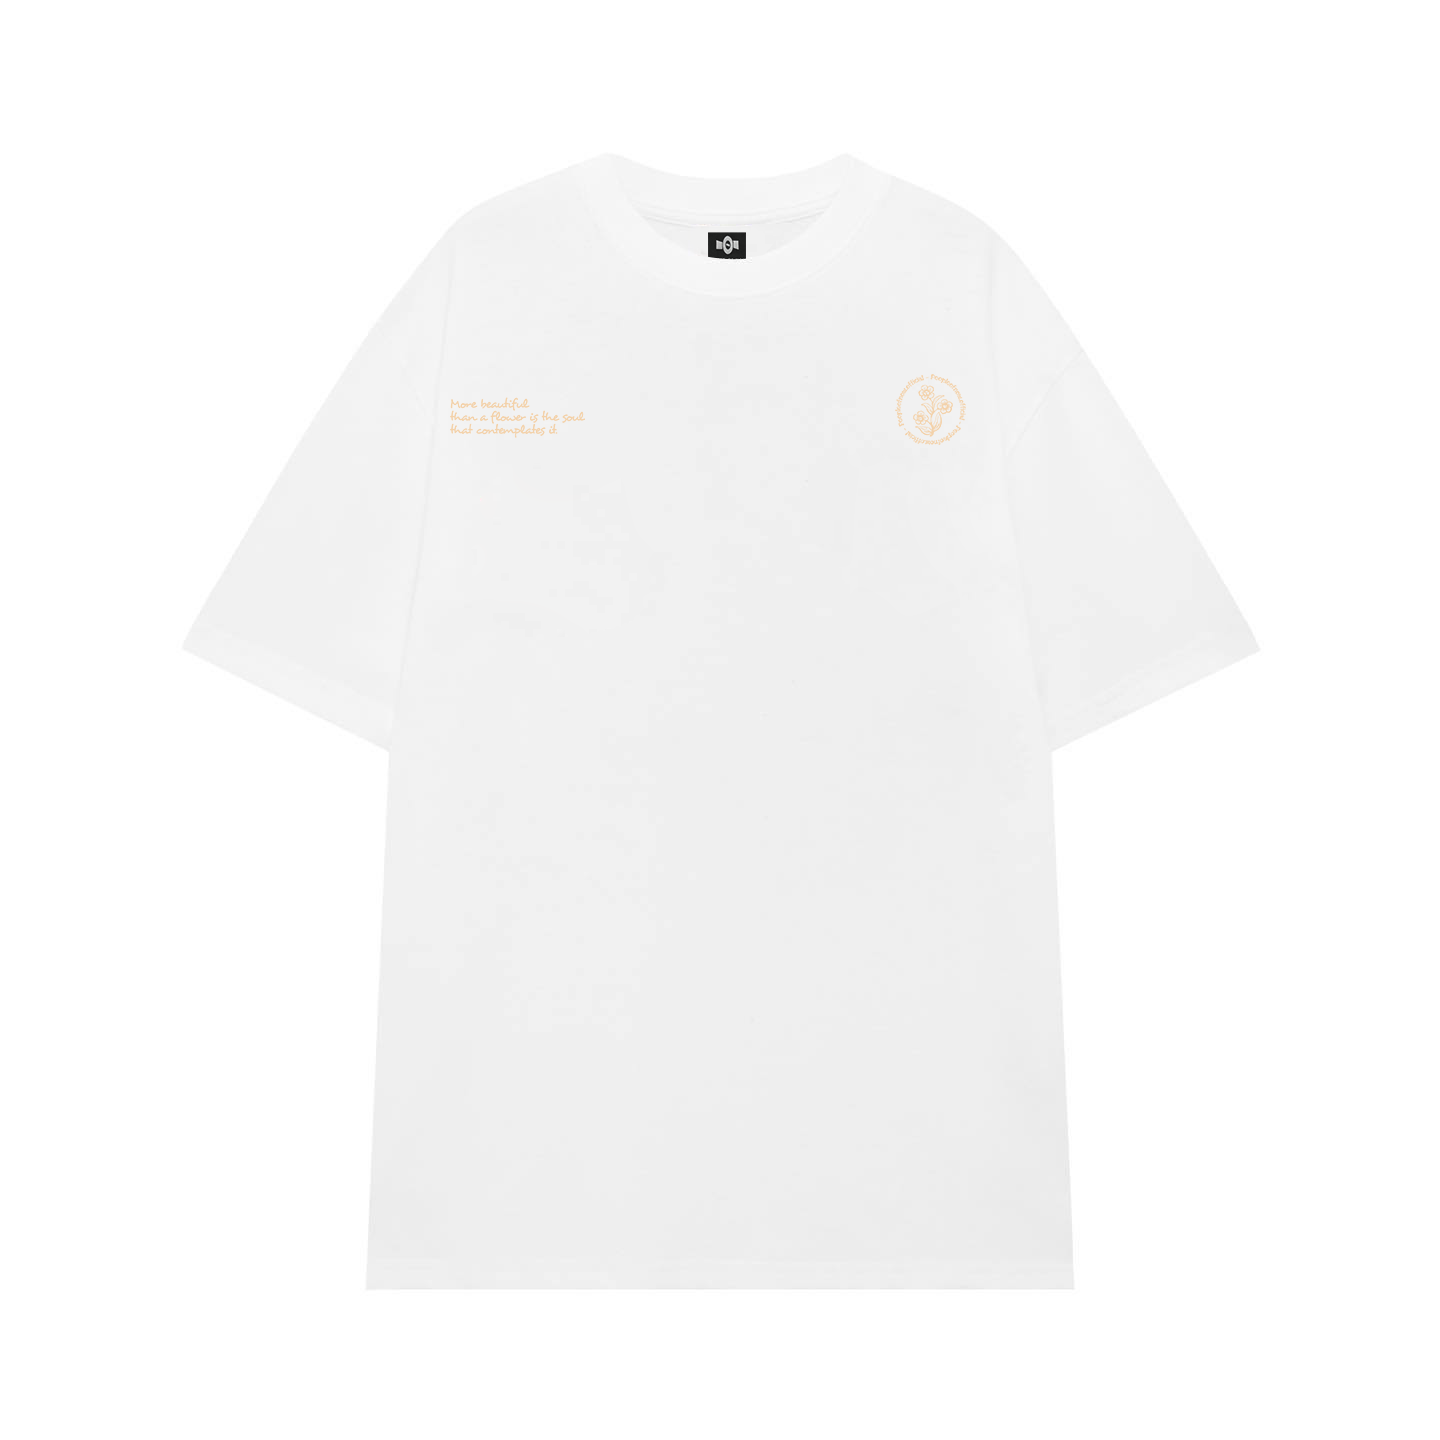 RelaxedFit TShirt White Cotton Jersey  DIOR